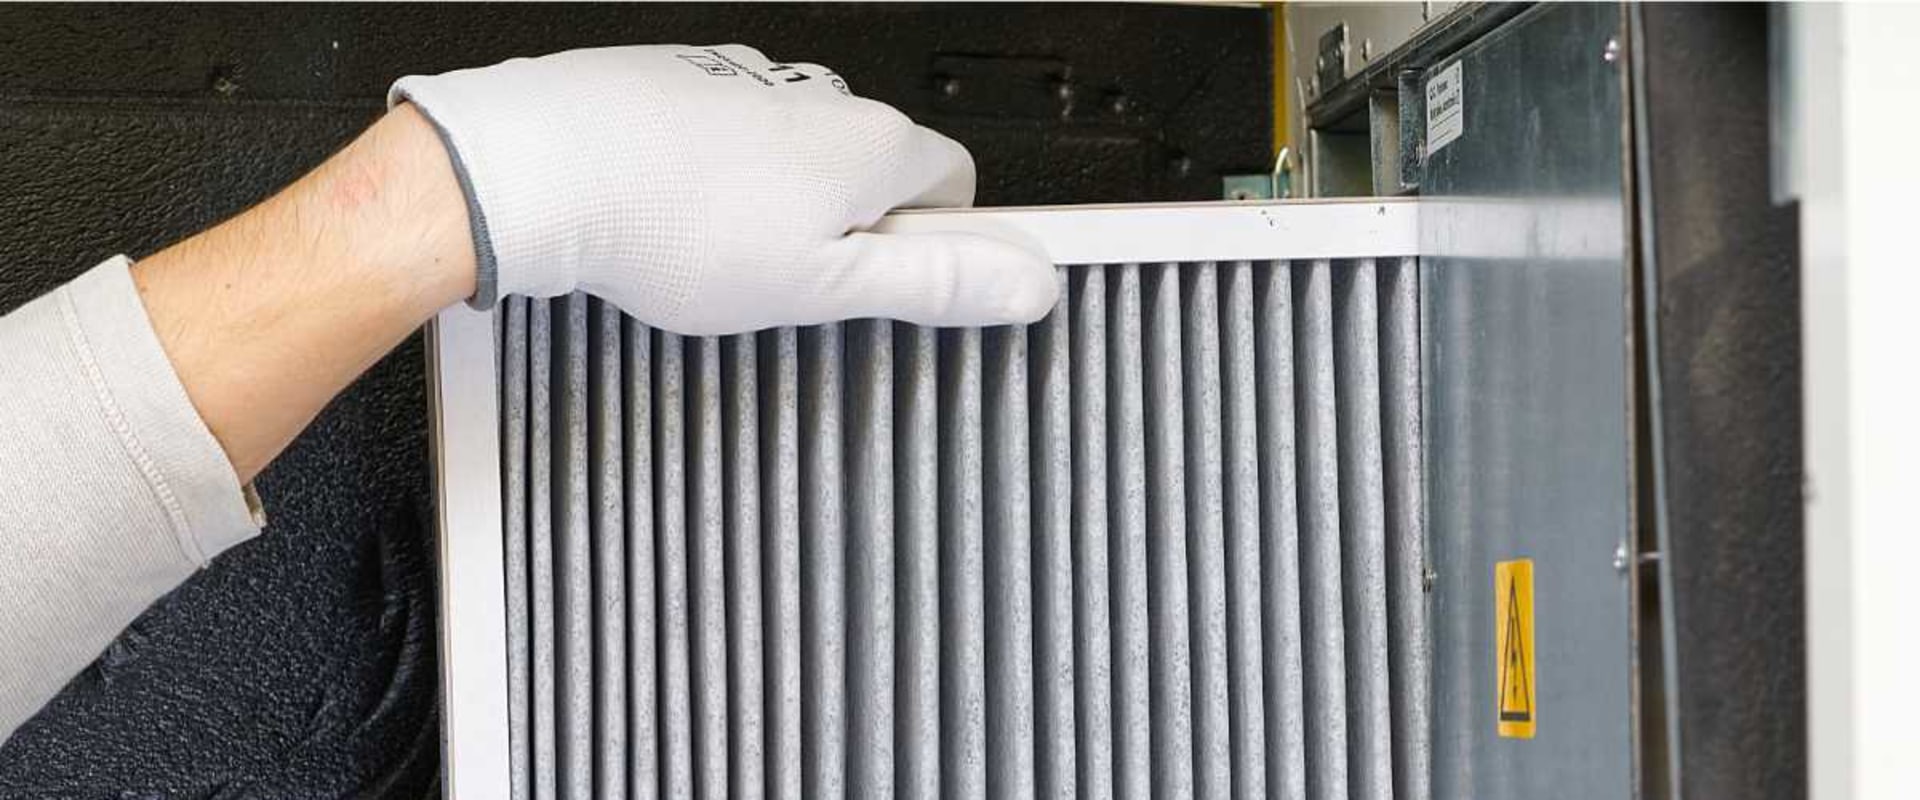 Debunking Myths About Air Filters and Furnace Filters